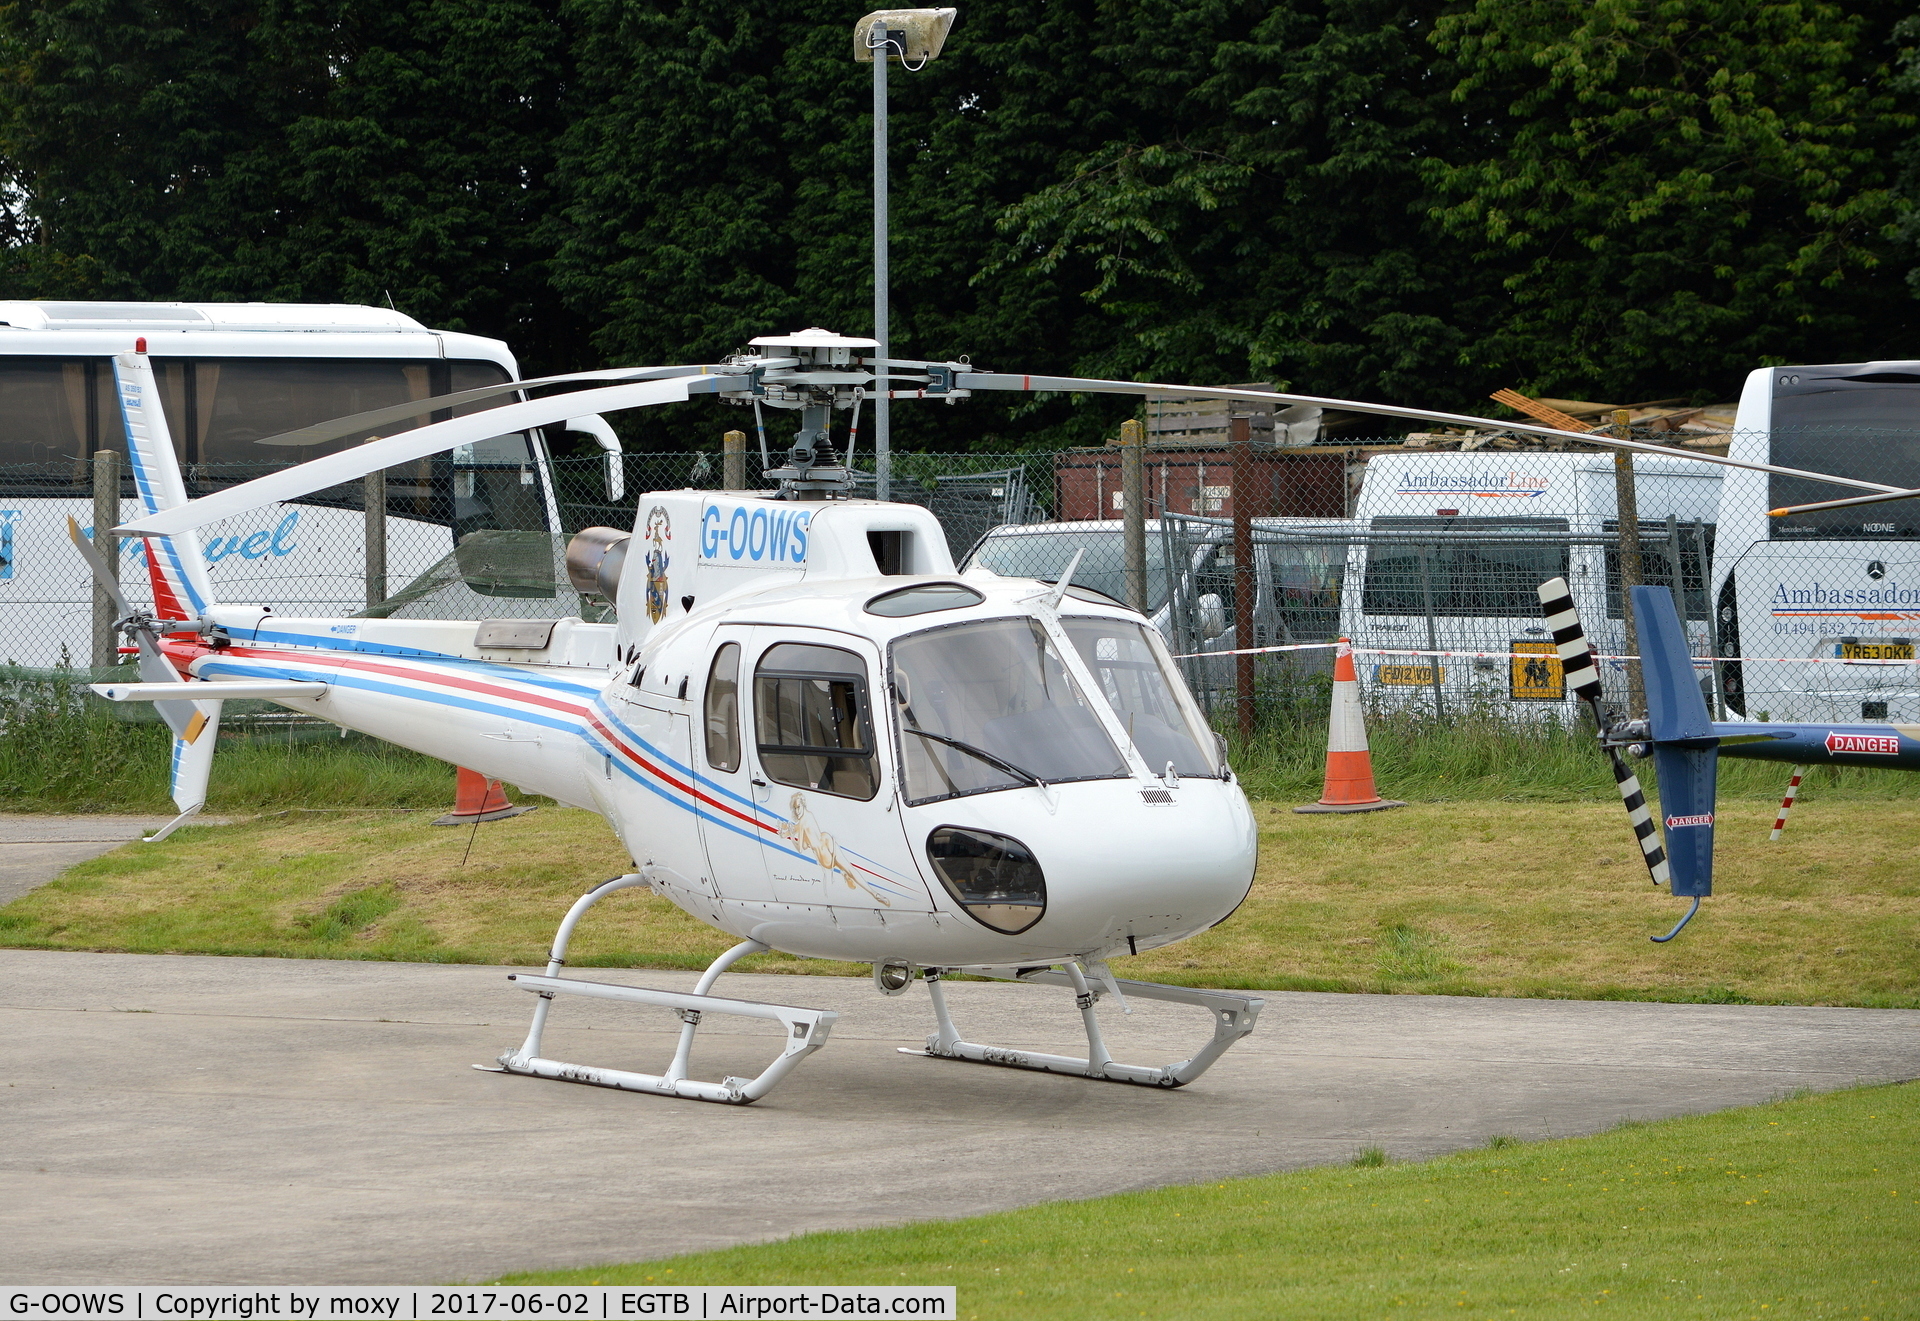 G-OOWS, 2008 Eurocopter AS-350B-3 Ecureuil Ecureuil C/N 4386, Eurocopter AS-350B-3 Ecureuil at Wycombe Air Park.